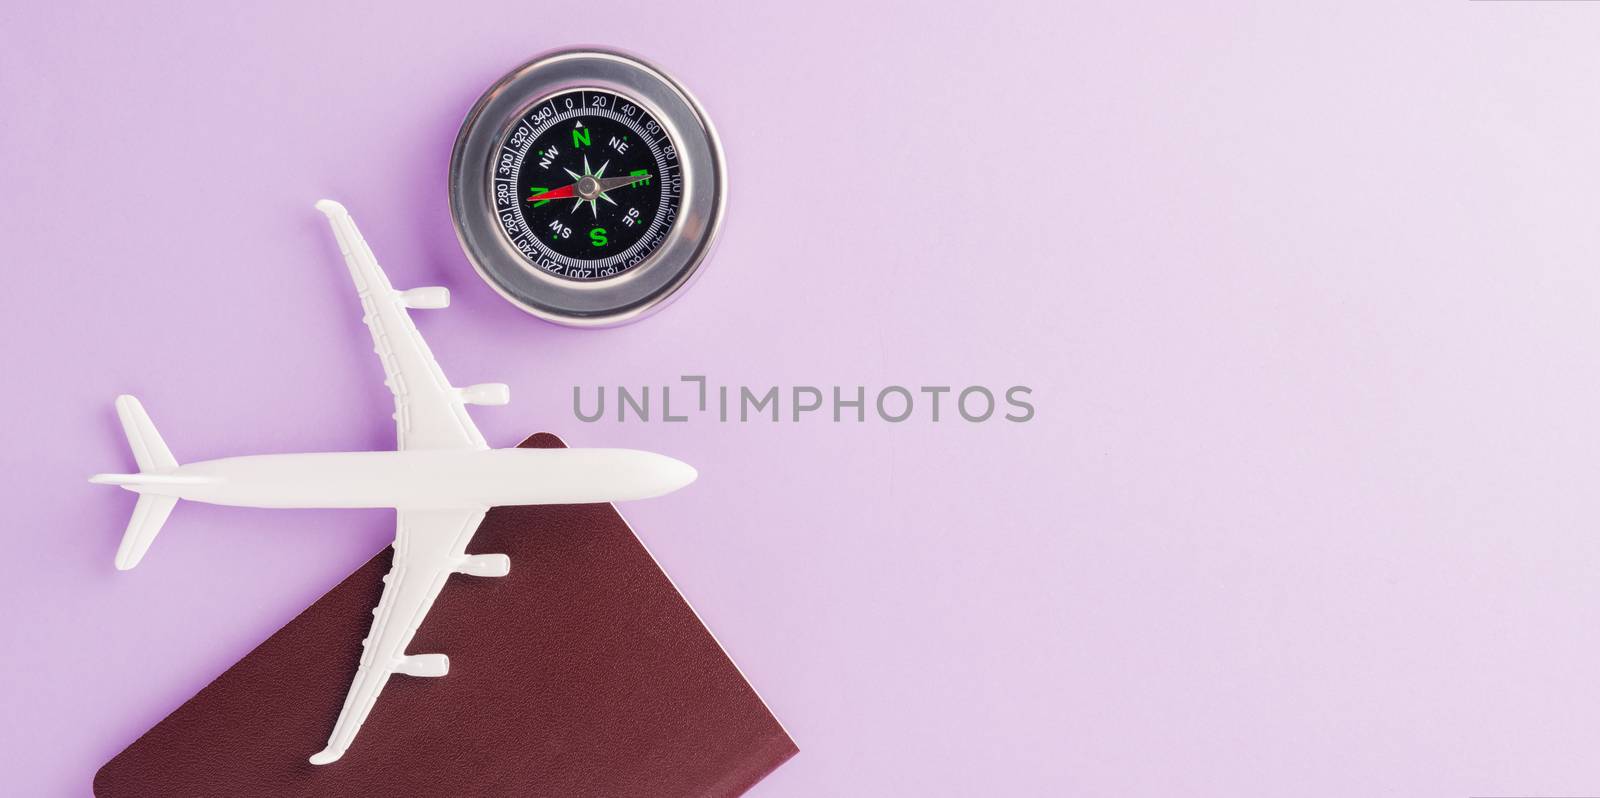 World Tourism Day, minimal toy model plane, passport and compass, studio shot isolated on a purple background with copy space for text, holiday travel concept